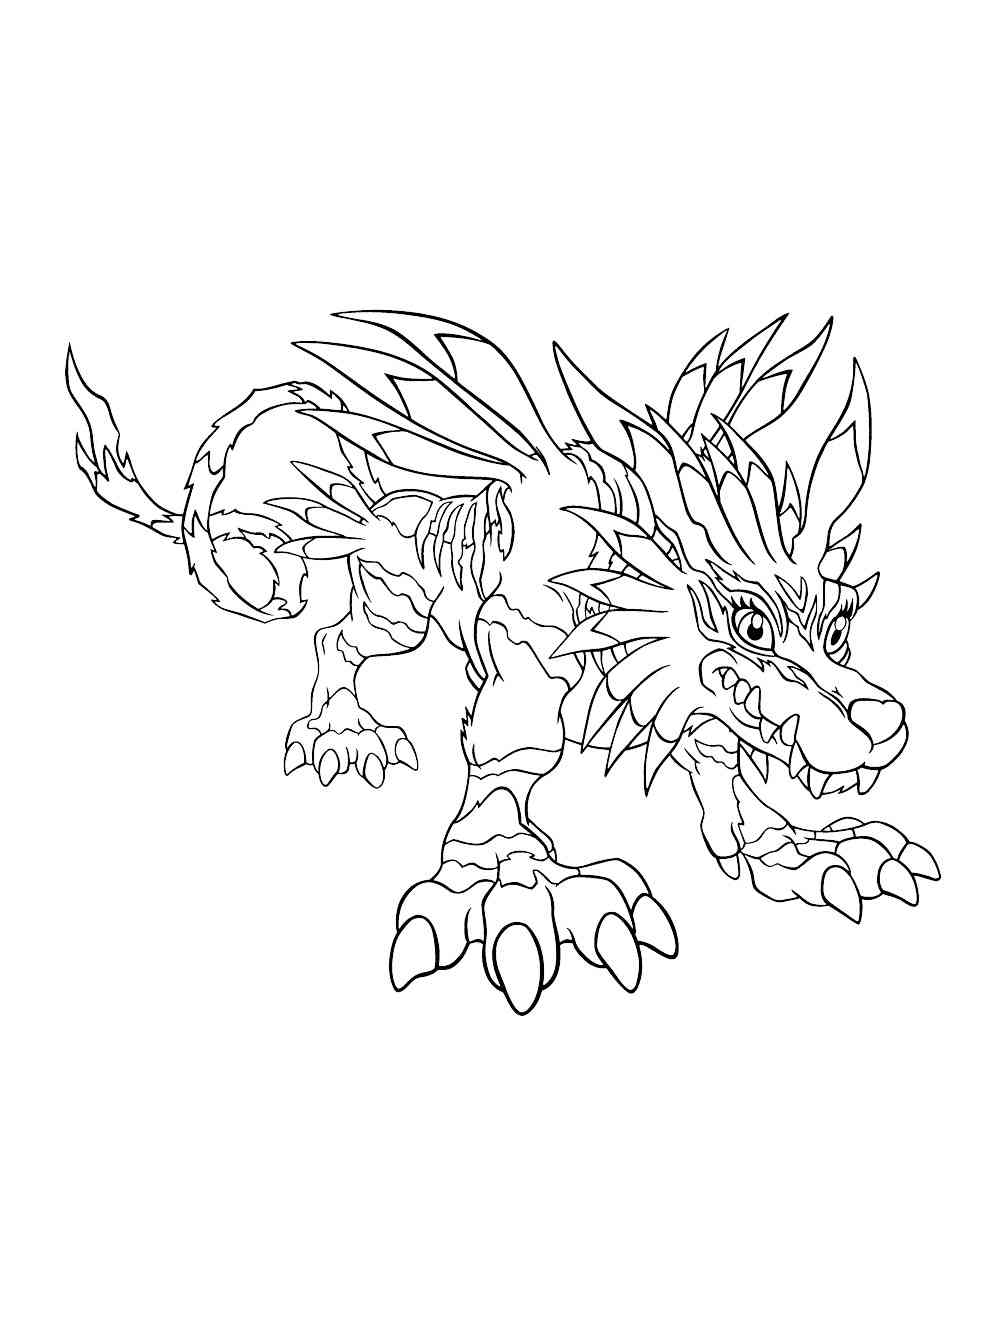 Digimon 18 coloring page